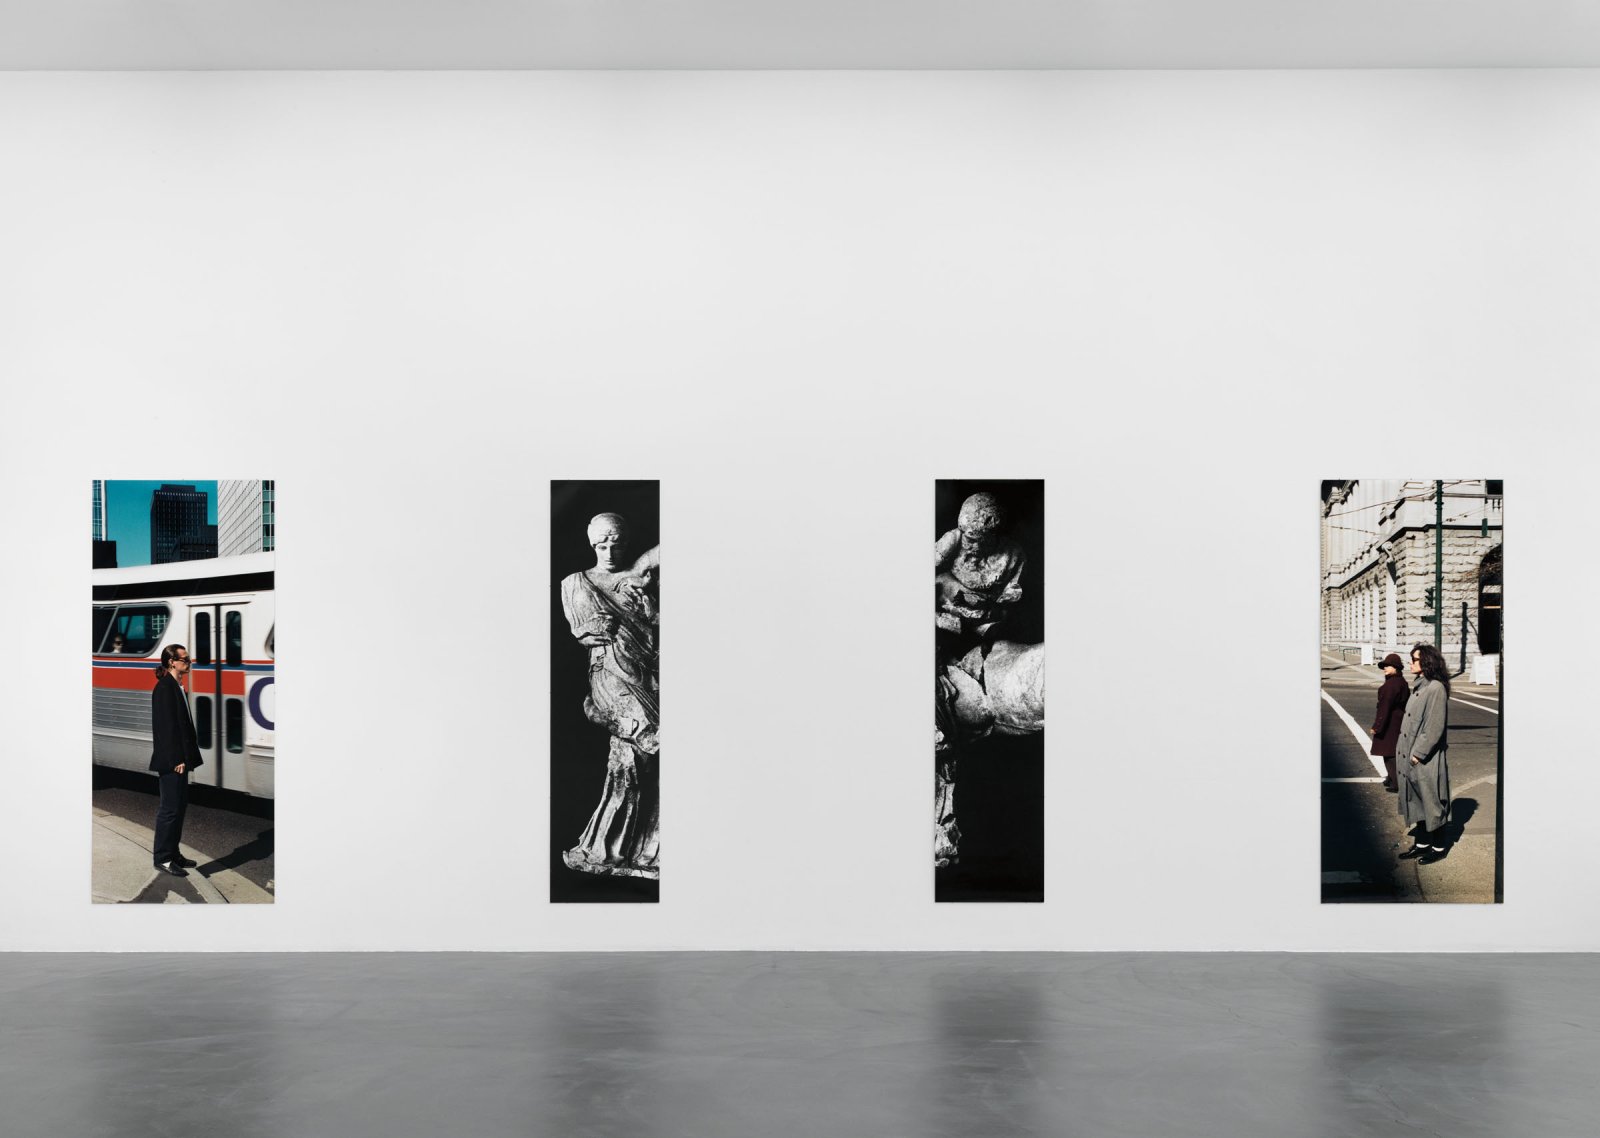 Ian Wallace, Untitled (Heavenly Embrace), 1987, photolaminate and acrylic on canvas, each 96 x 40 in. (244 x 101 cm)